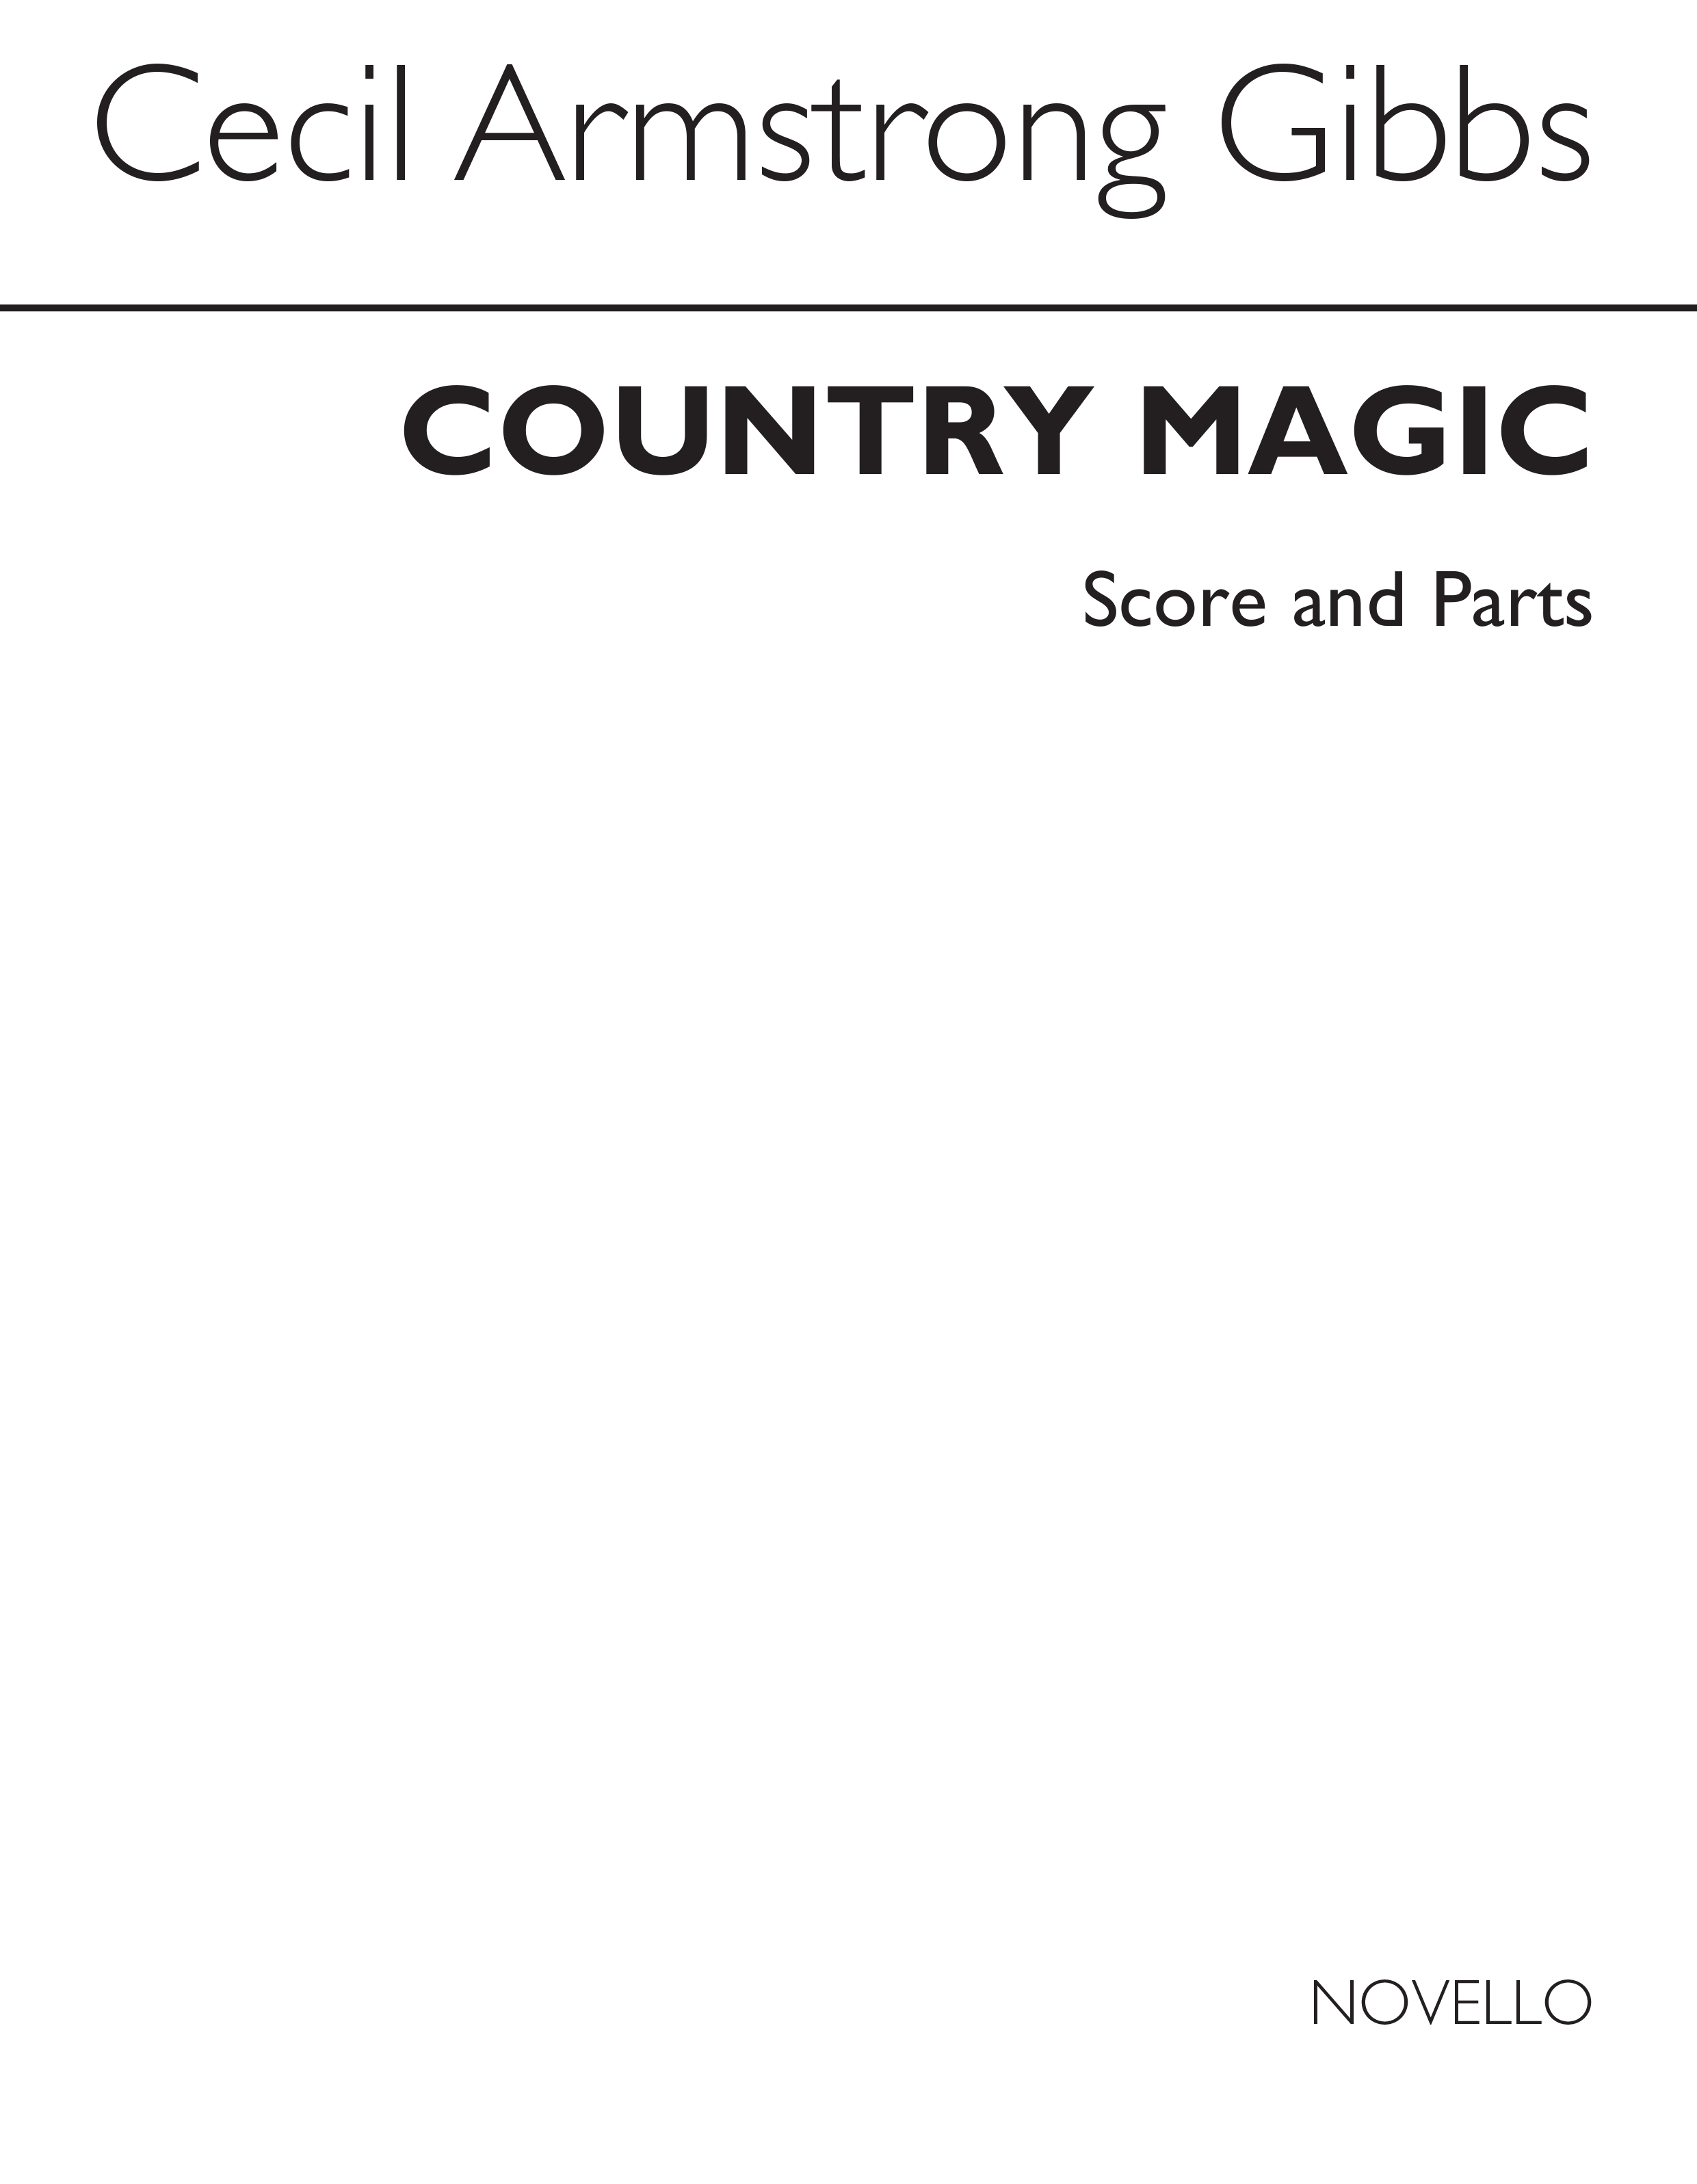 Cecil Armstrong Gibbs: Country Magic (Score And Parts)